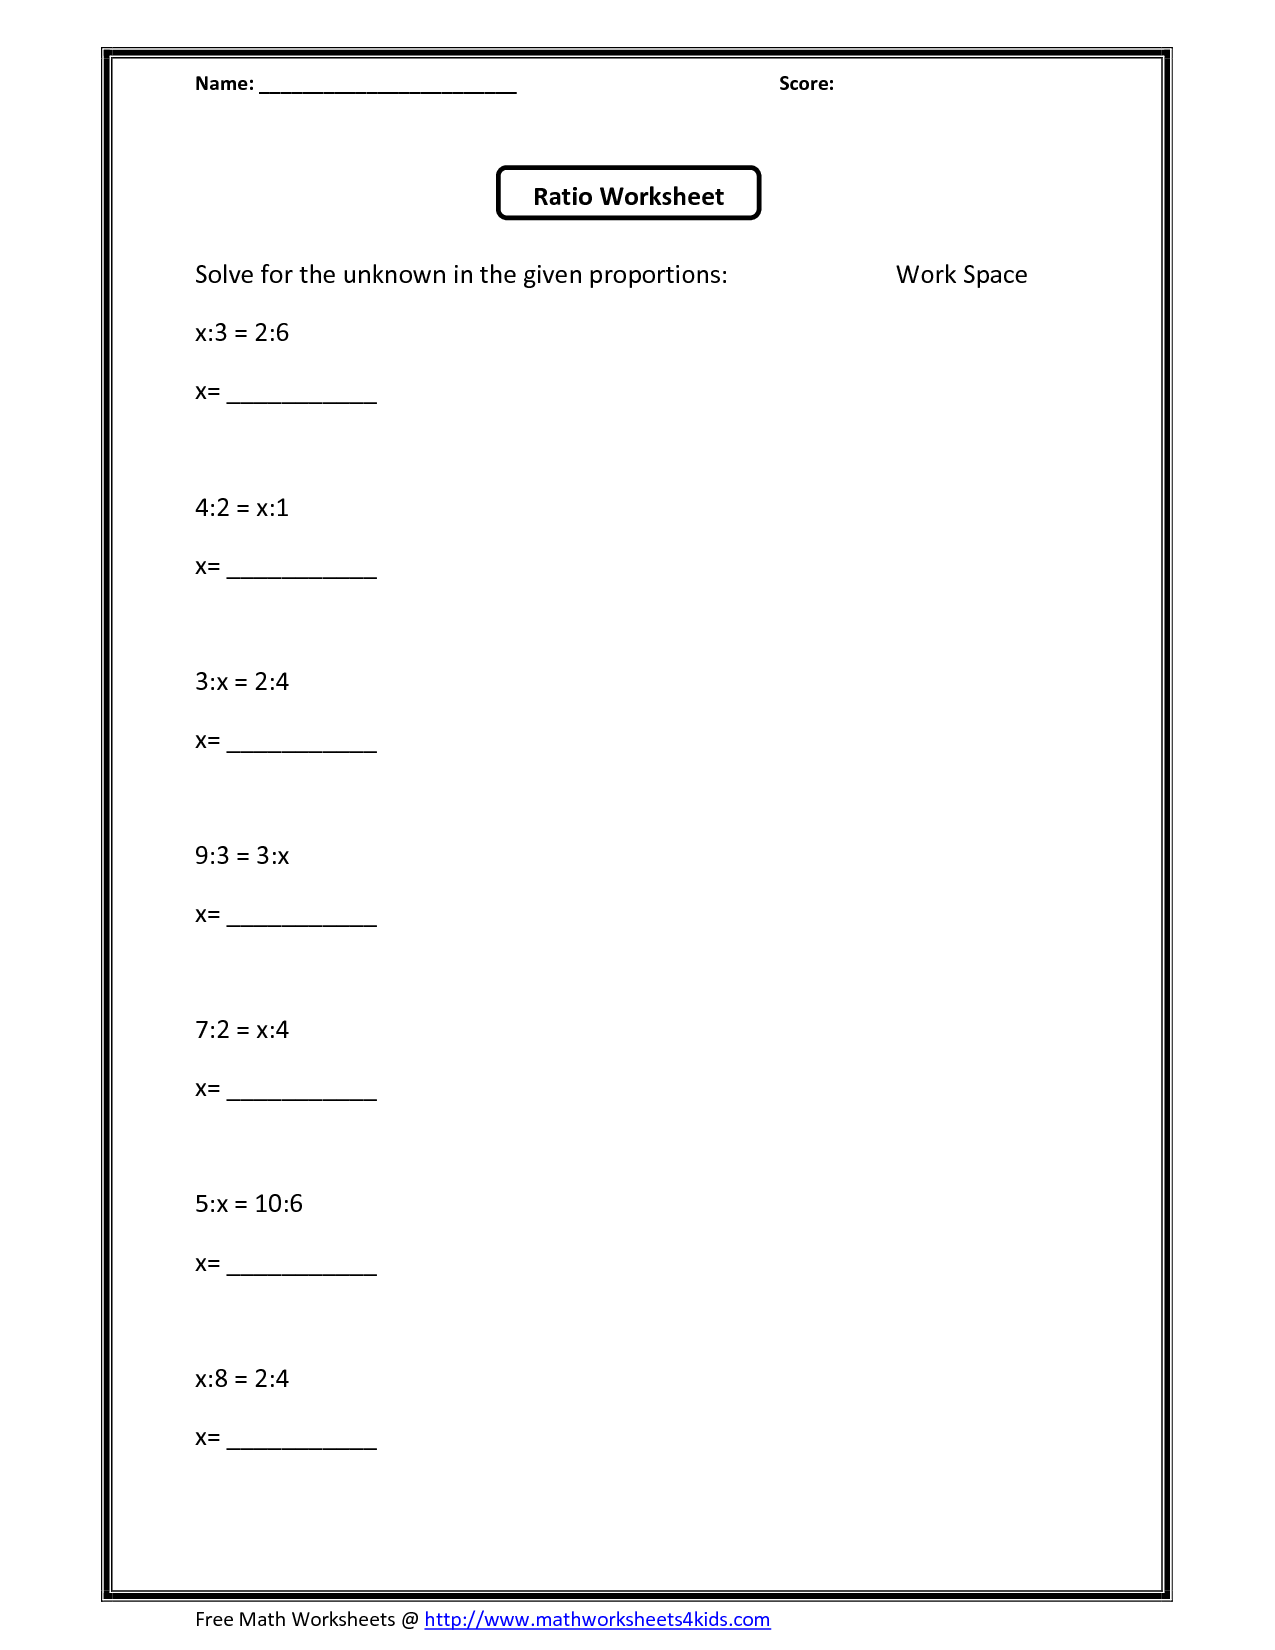 Ratios and Proportions Worksheet Answers Image